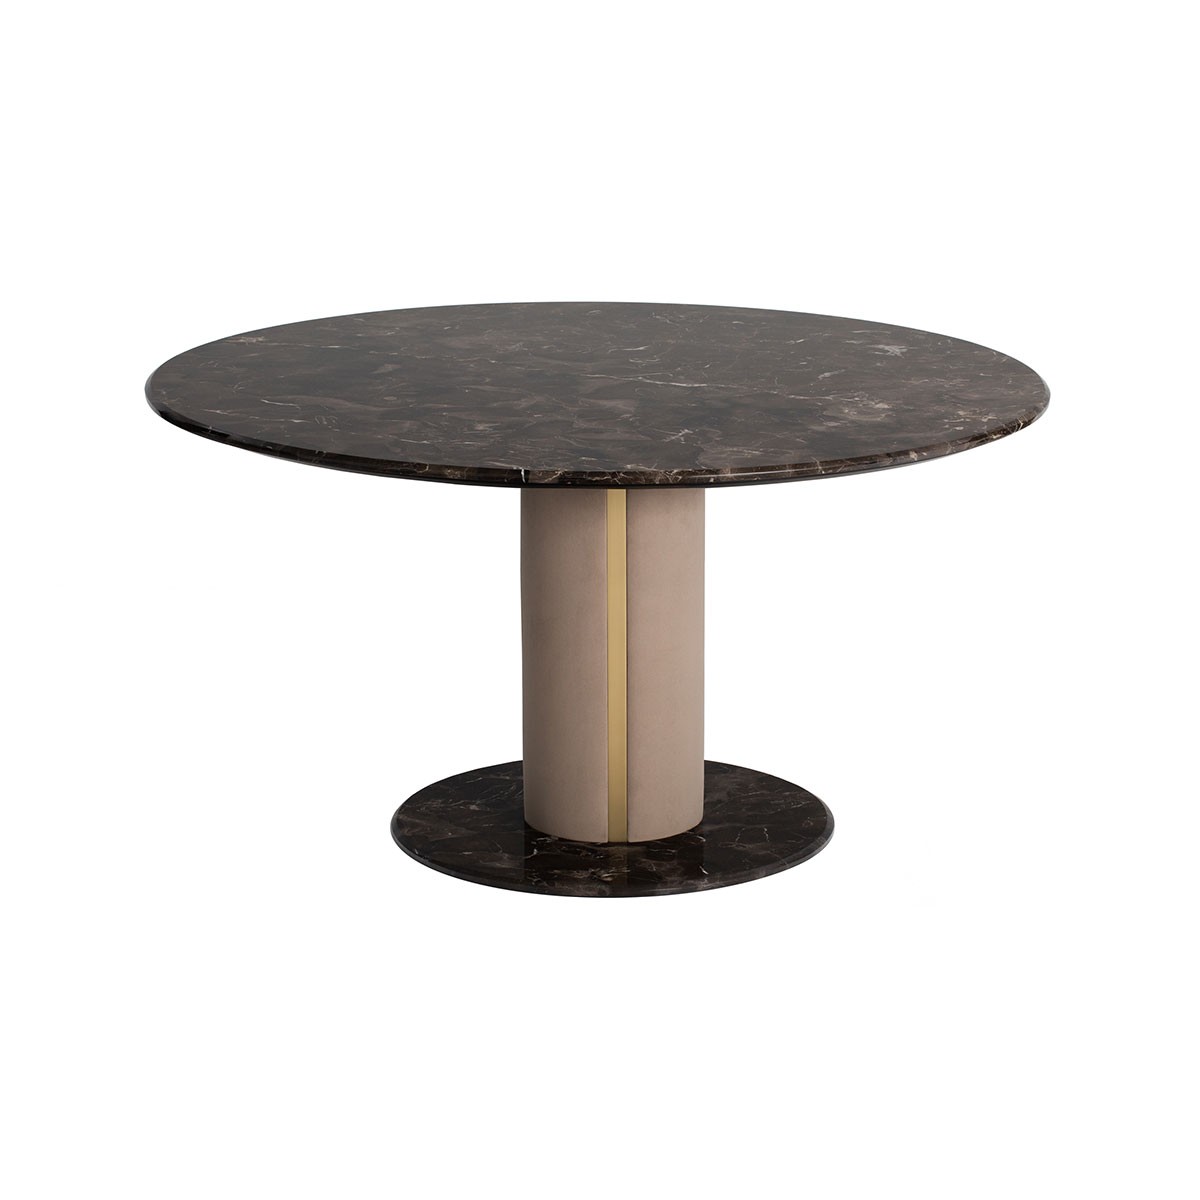 The Ludo Dining Table